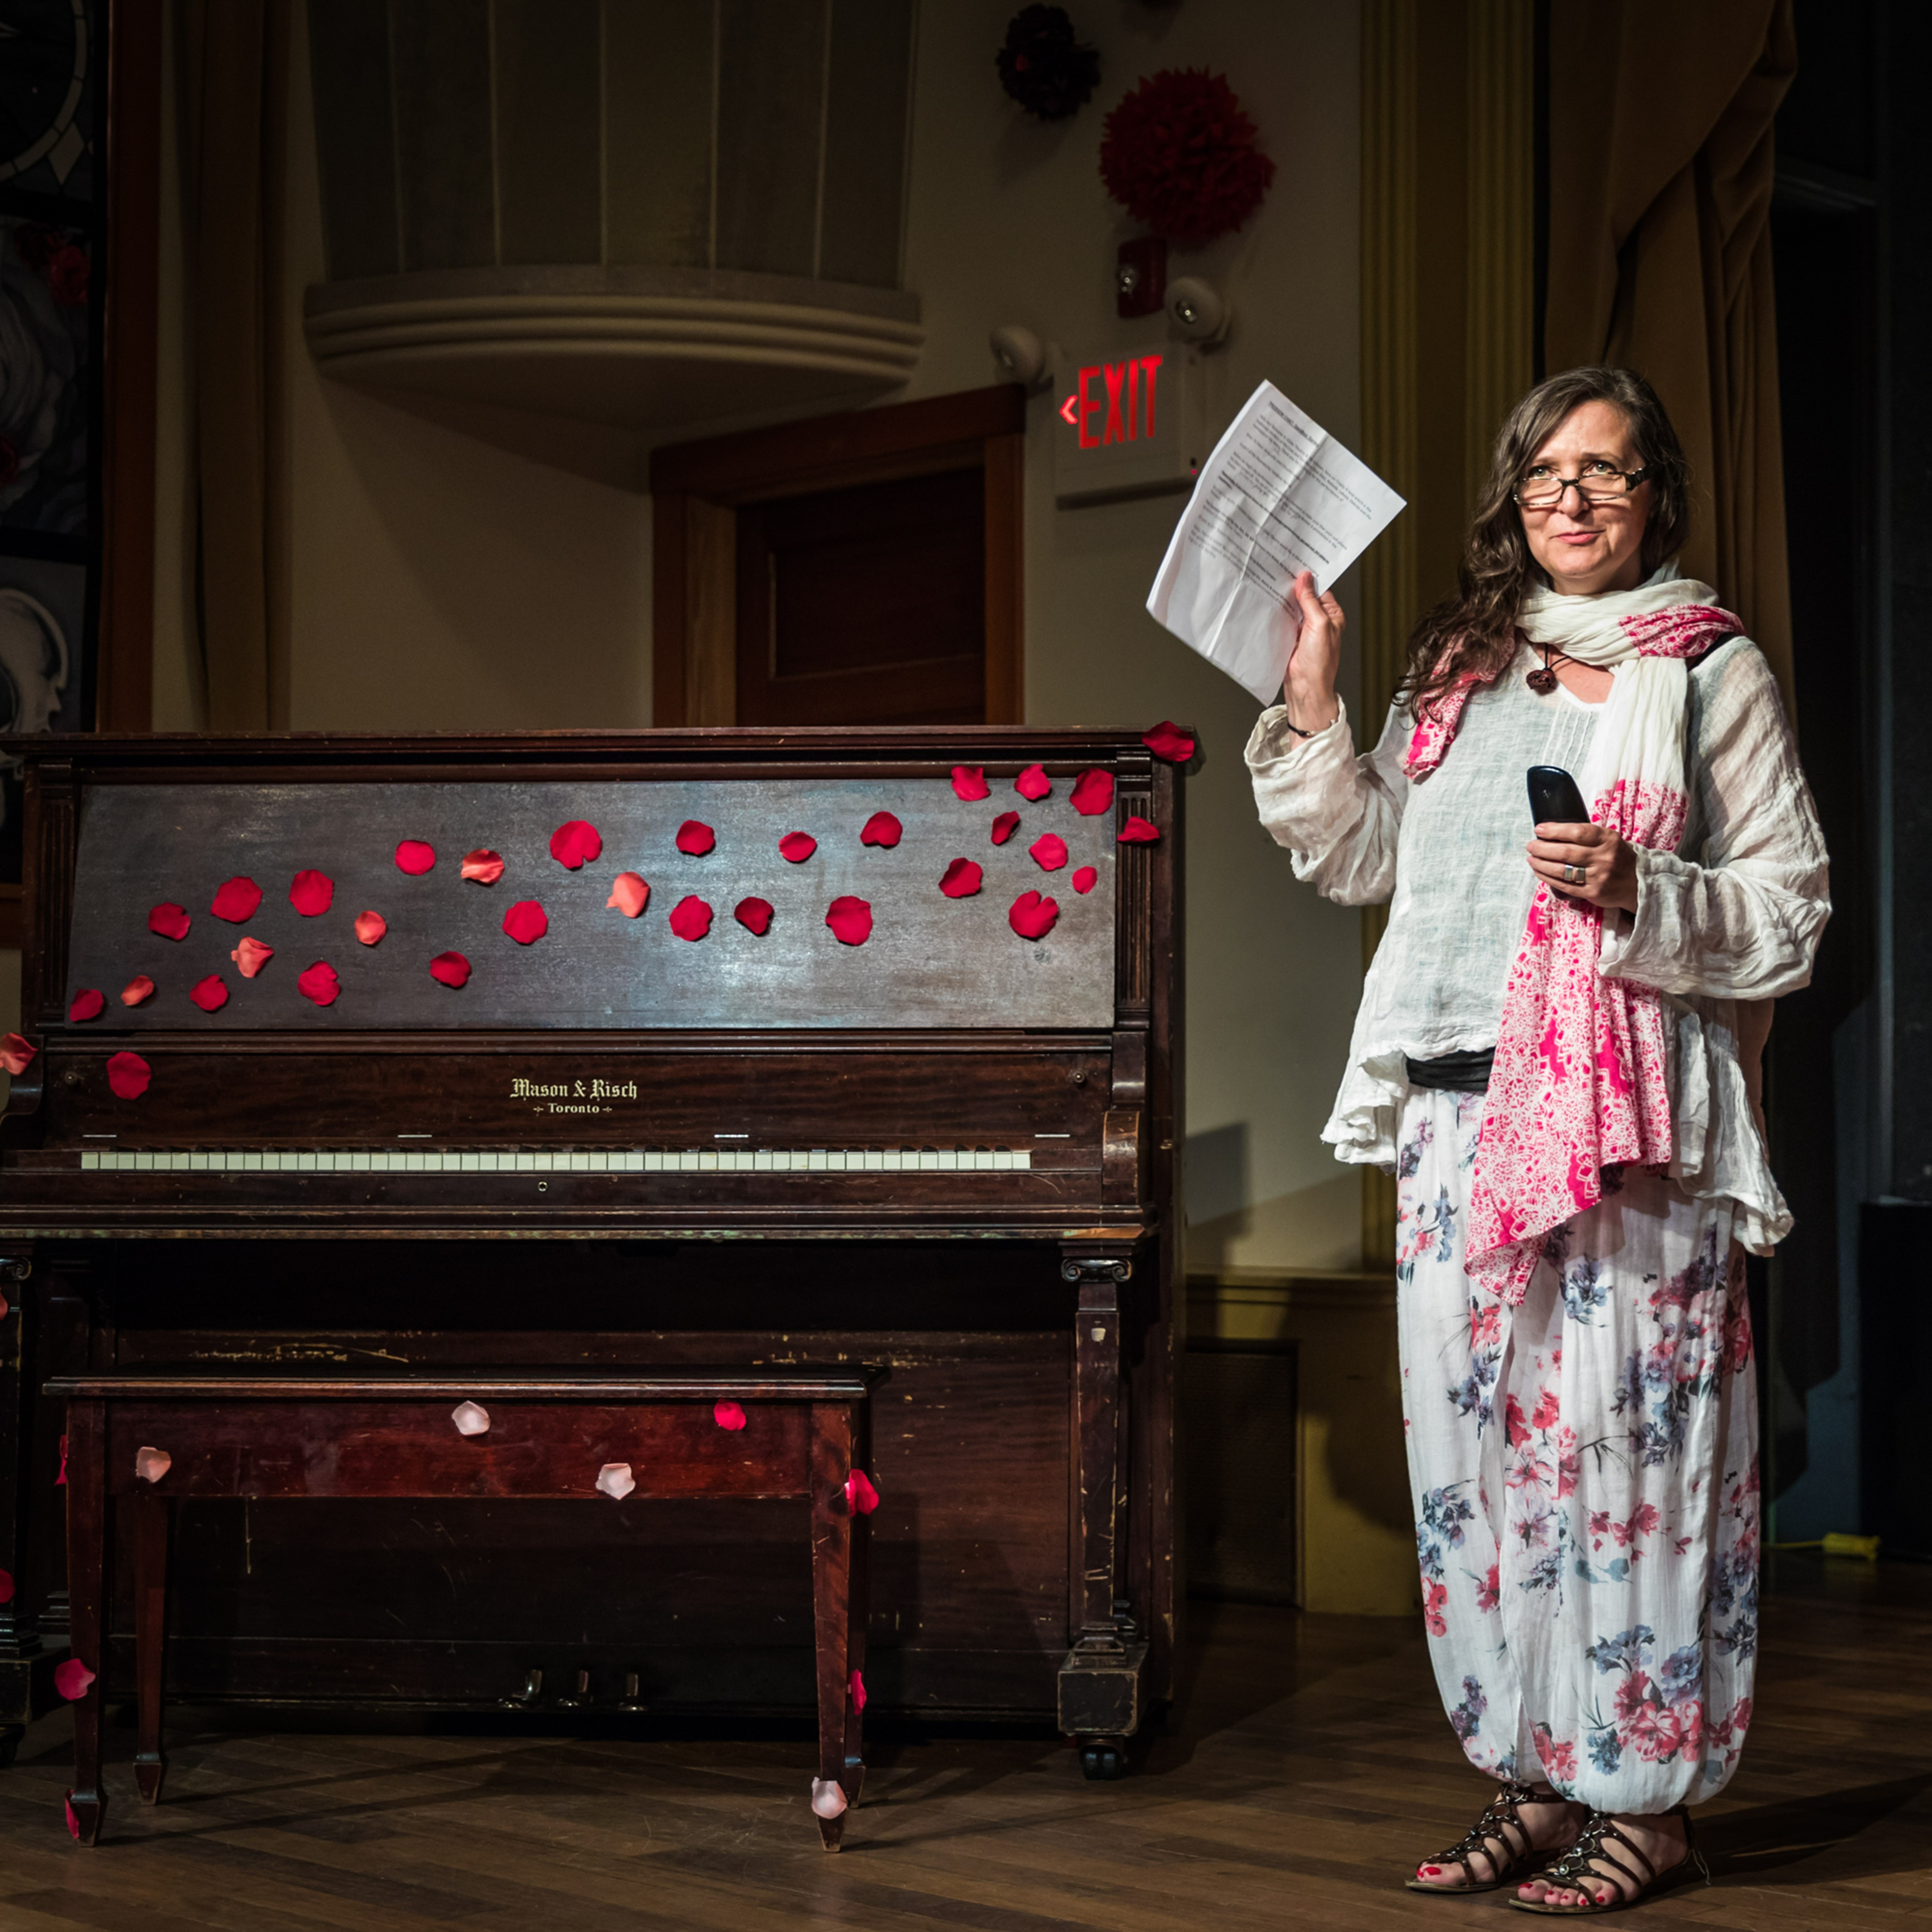 Traci Foster - Woman wearing glasses  on stage wearing a long sleeve top, a long skirt and a  scarf. She is holding up a sheet of paper and standing next to a piano.